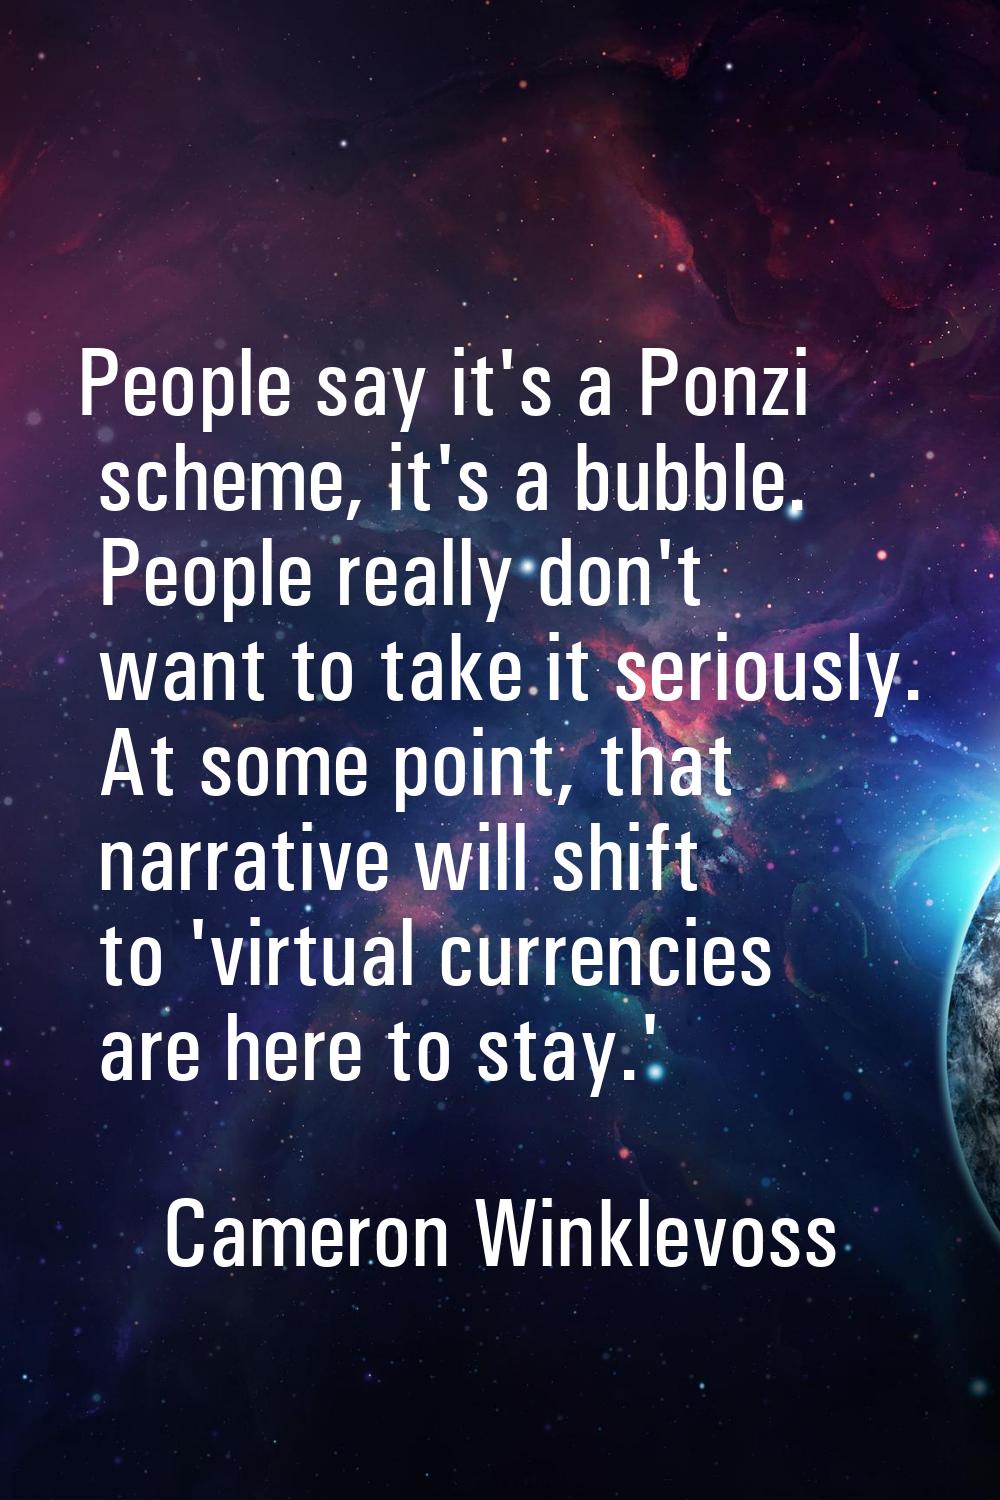 People say it's a Ponzi scheme, it's a bubble. People really don't want to take it seriously. At so